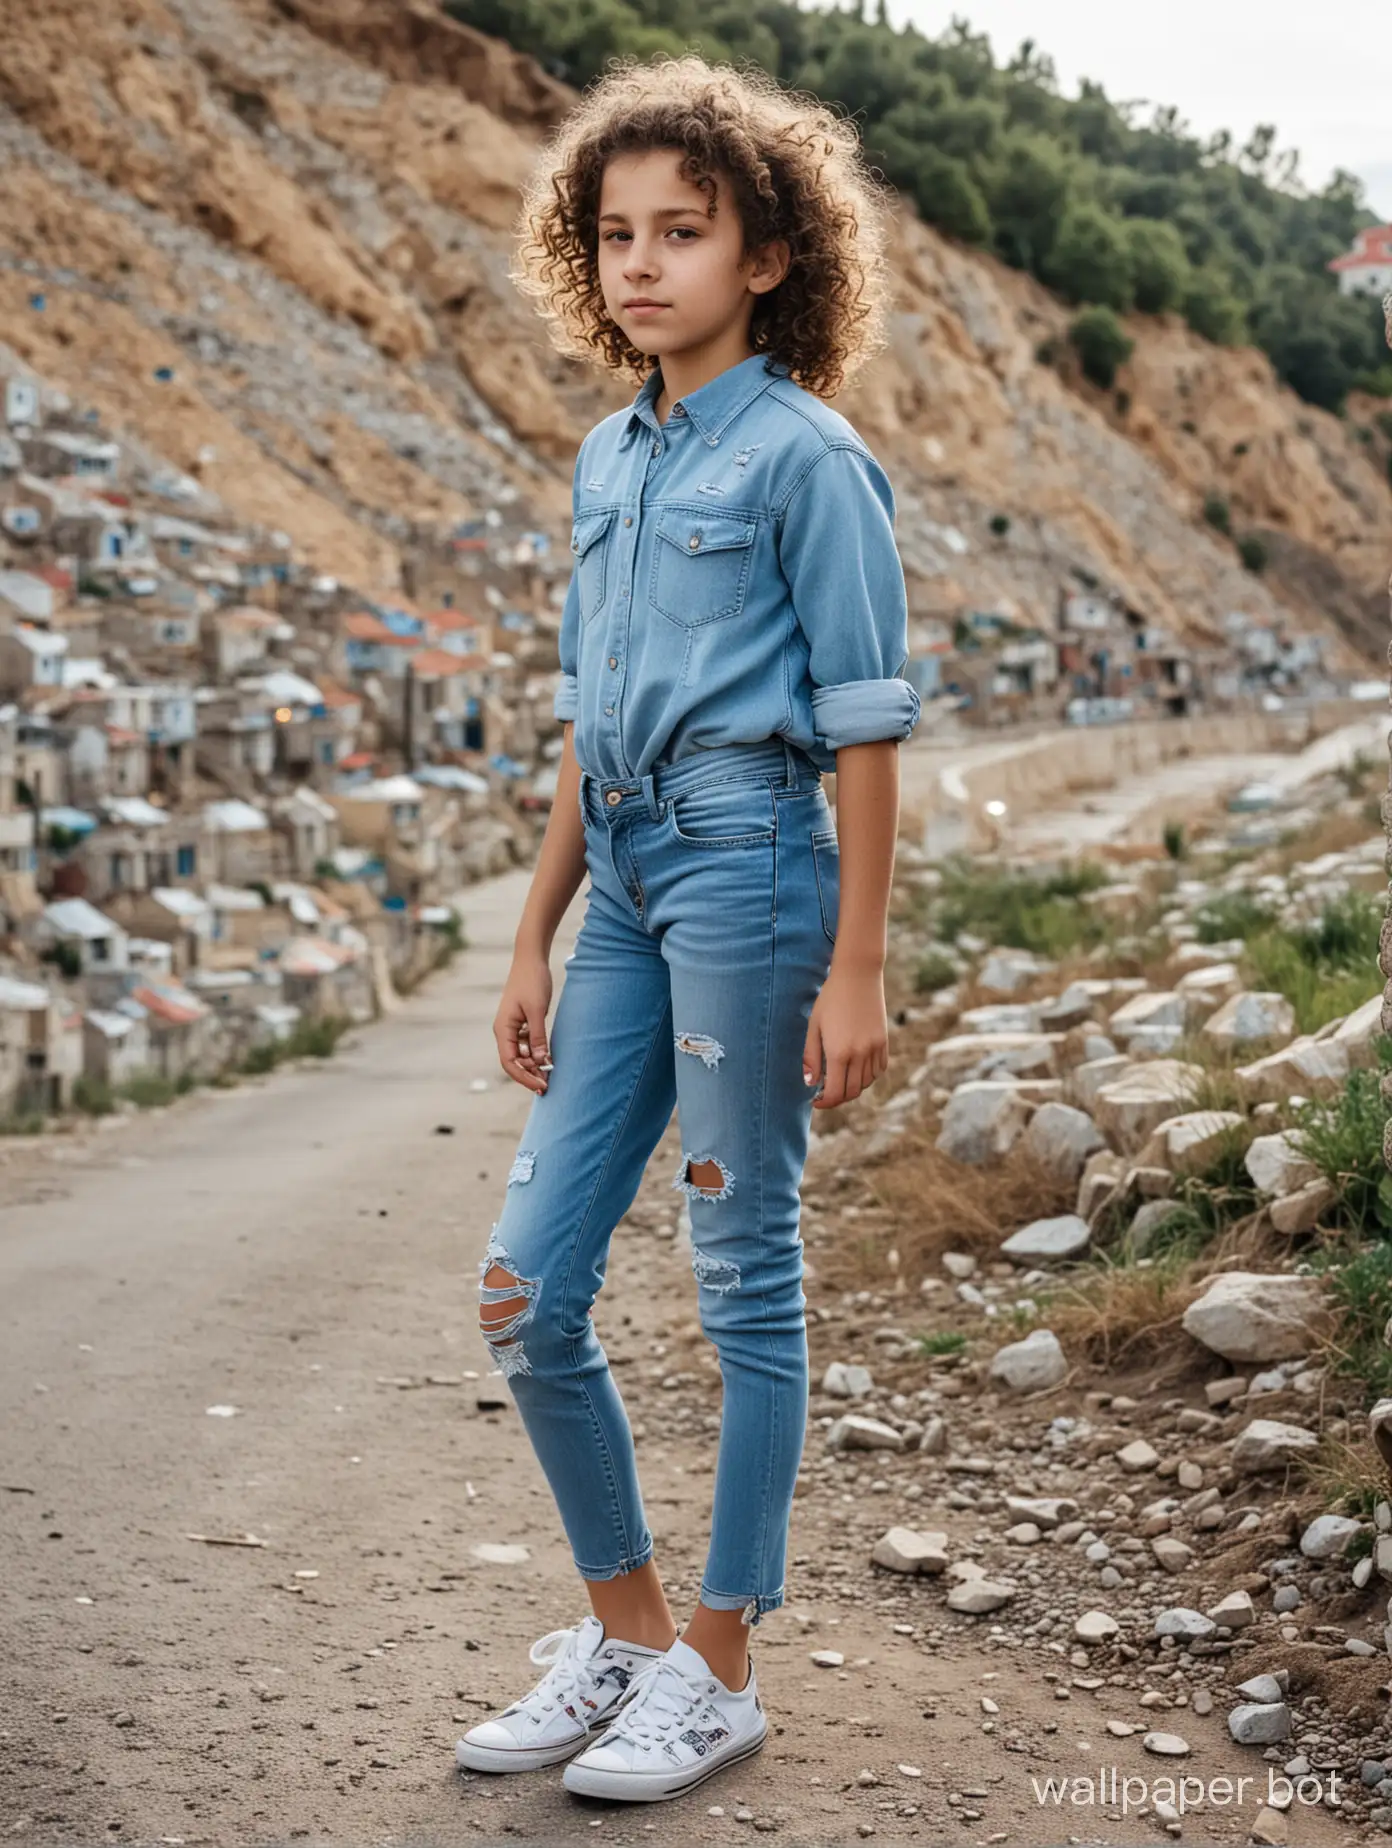 11-year-old girl with curls in light jeans with holes, Crimea, view of a small town, full-length, side view